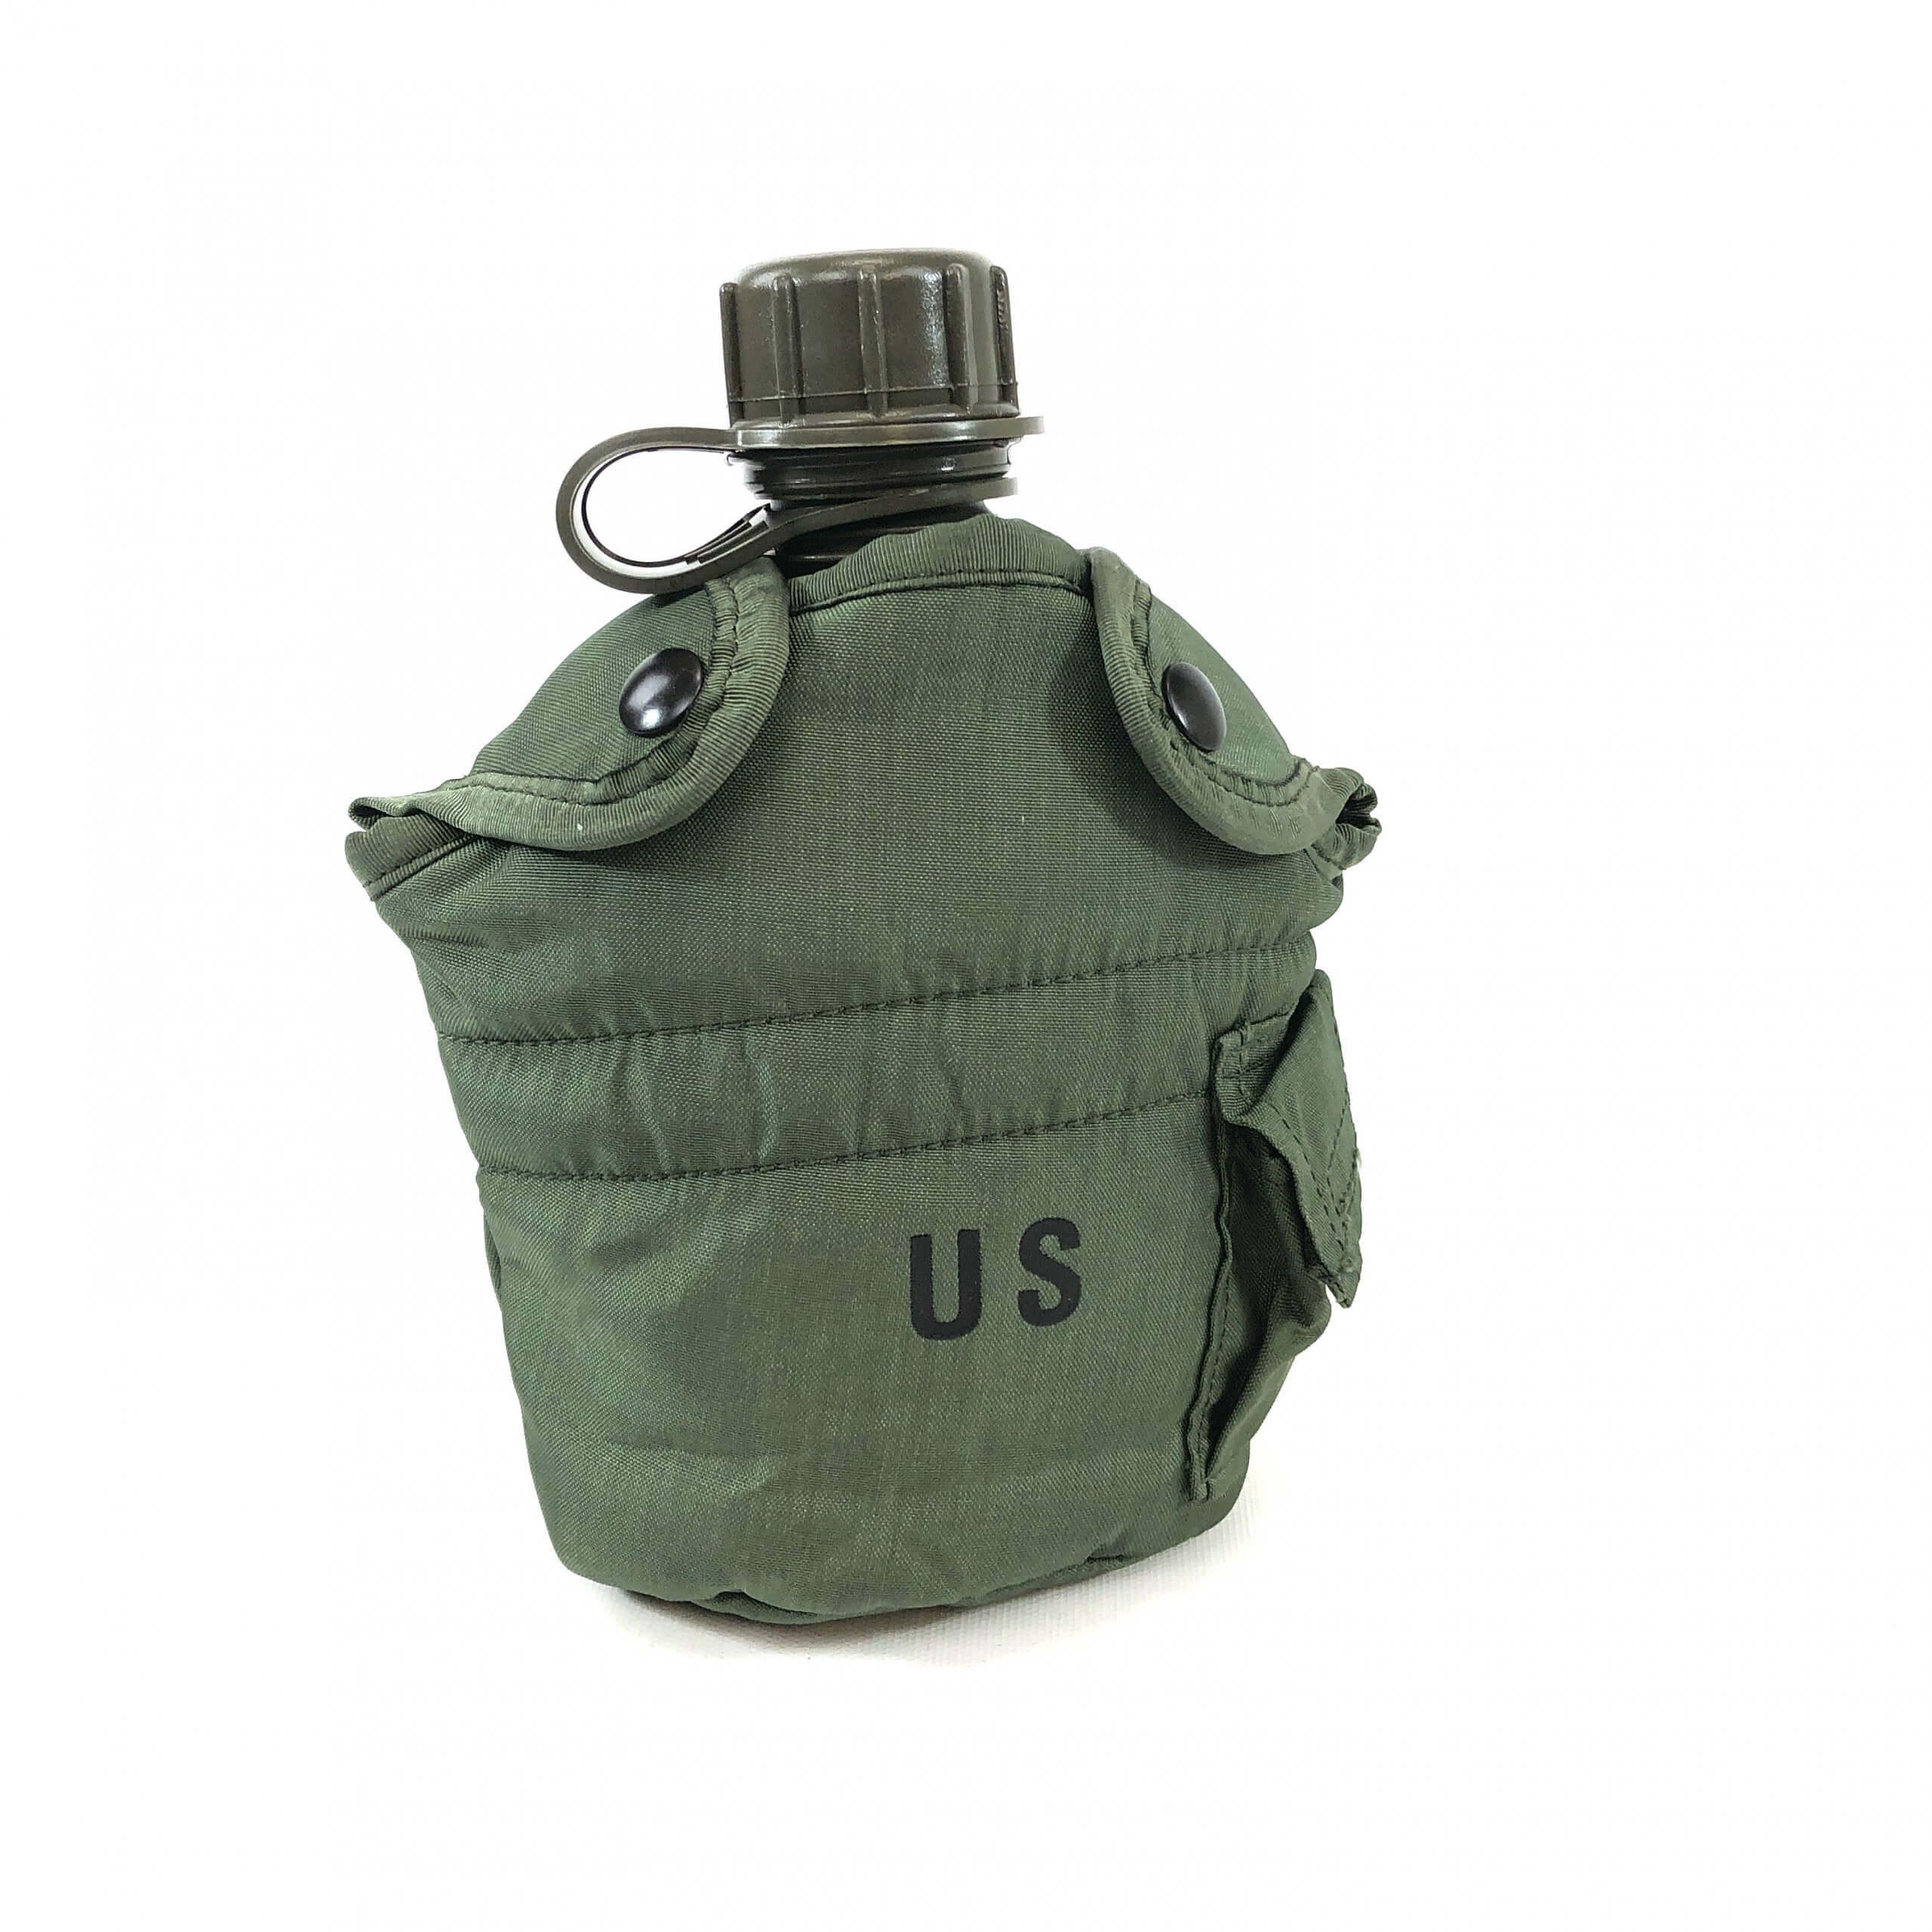 US Army Feldflasche Alice oliv mit Nylonbezug Water bootle Canteen cover 